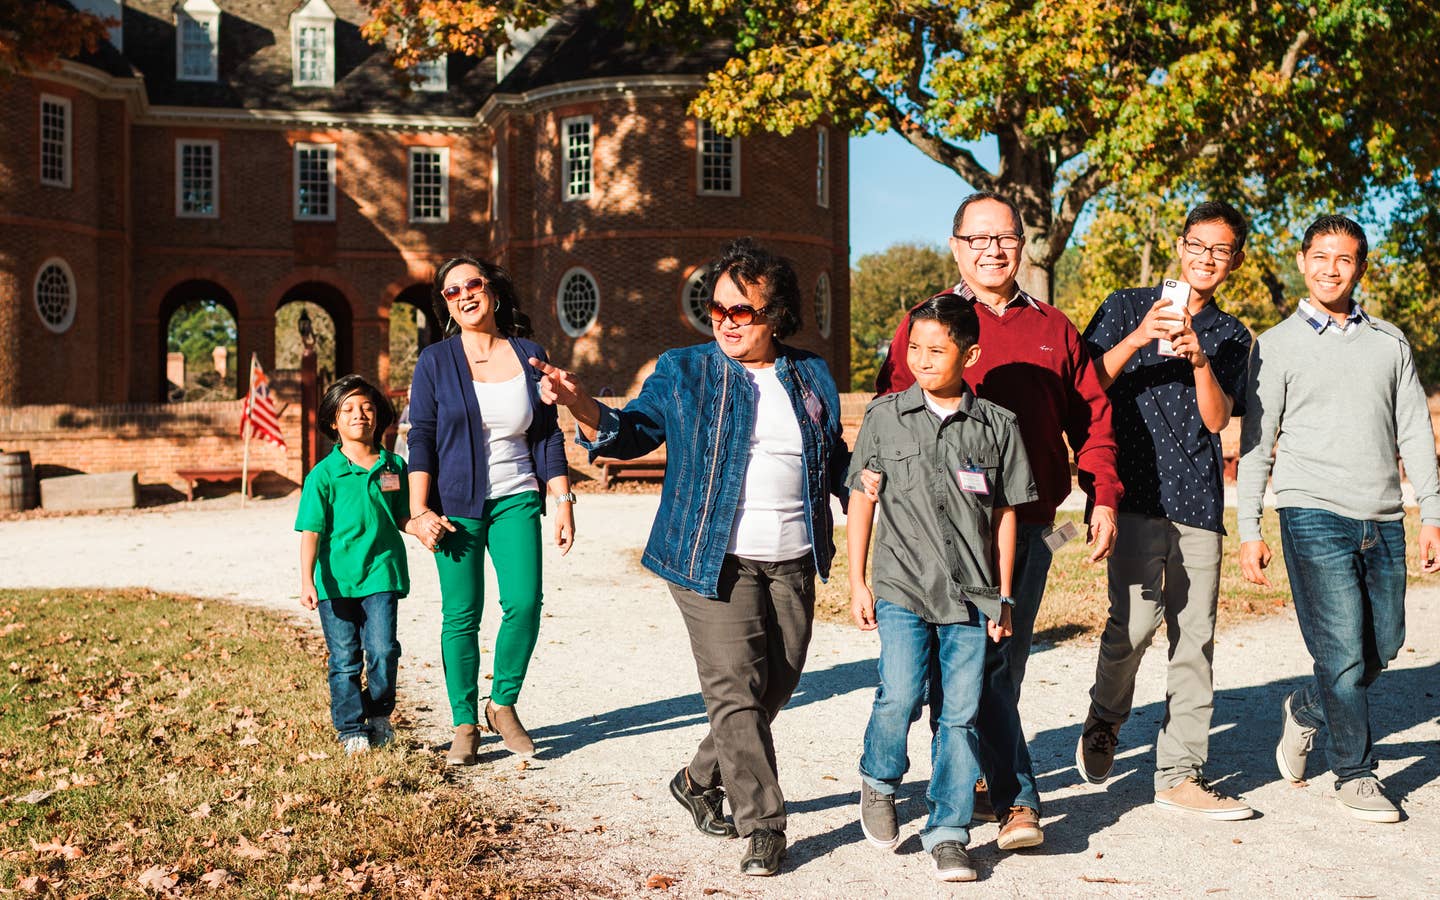 Several men, women and children walk outdoors around Colonial Williamsburg dressed in fall apparel.